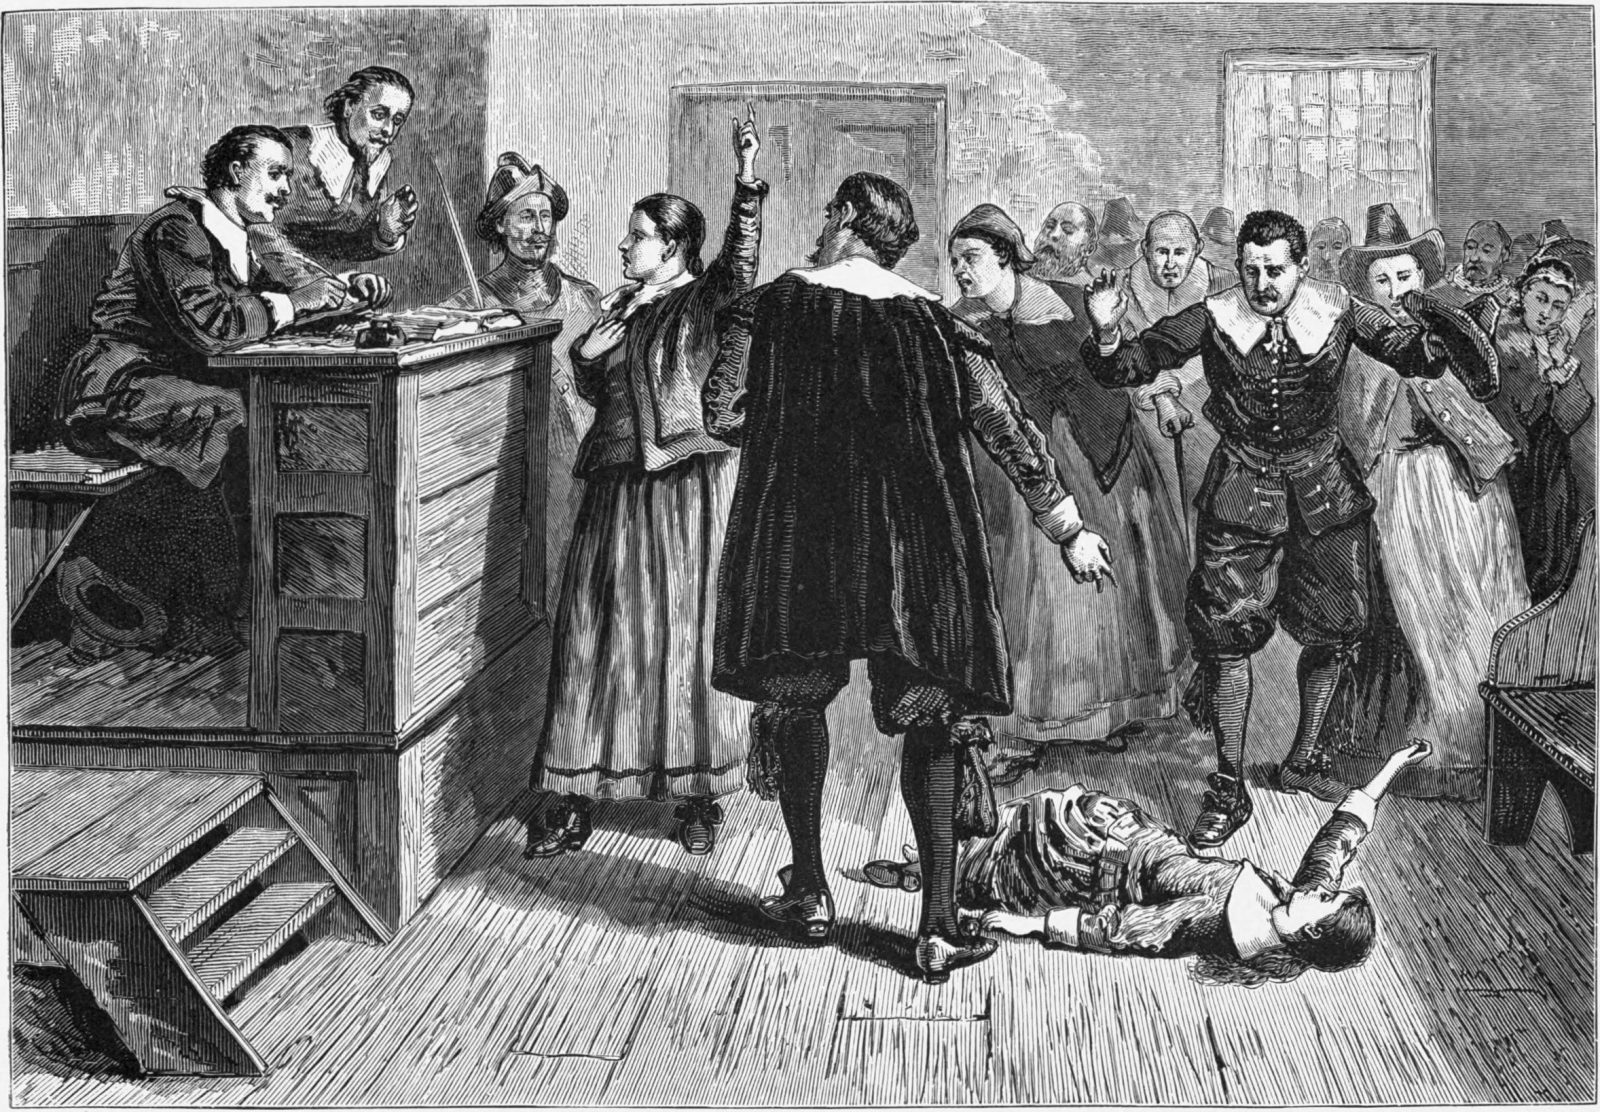 How Long Would You Survive in the Middle Ages? Salem Witch trials